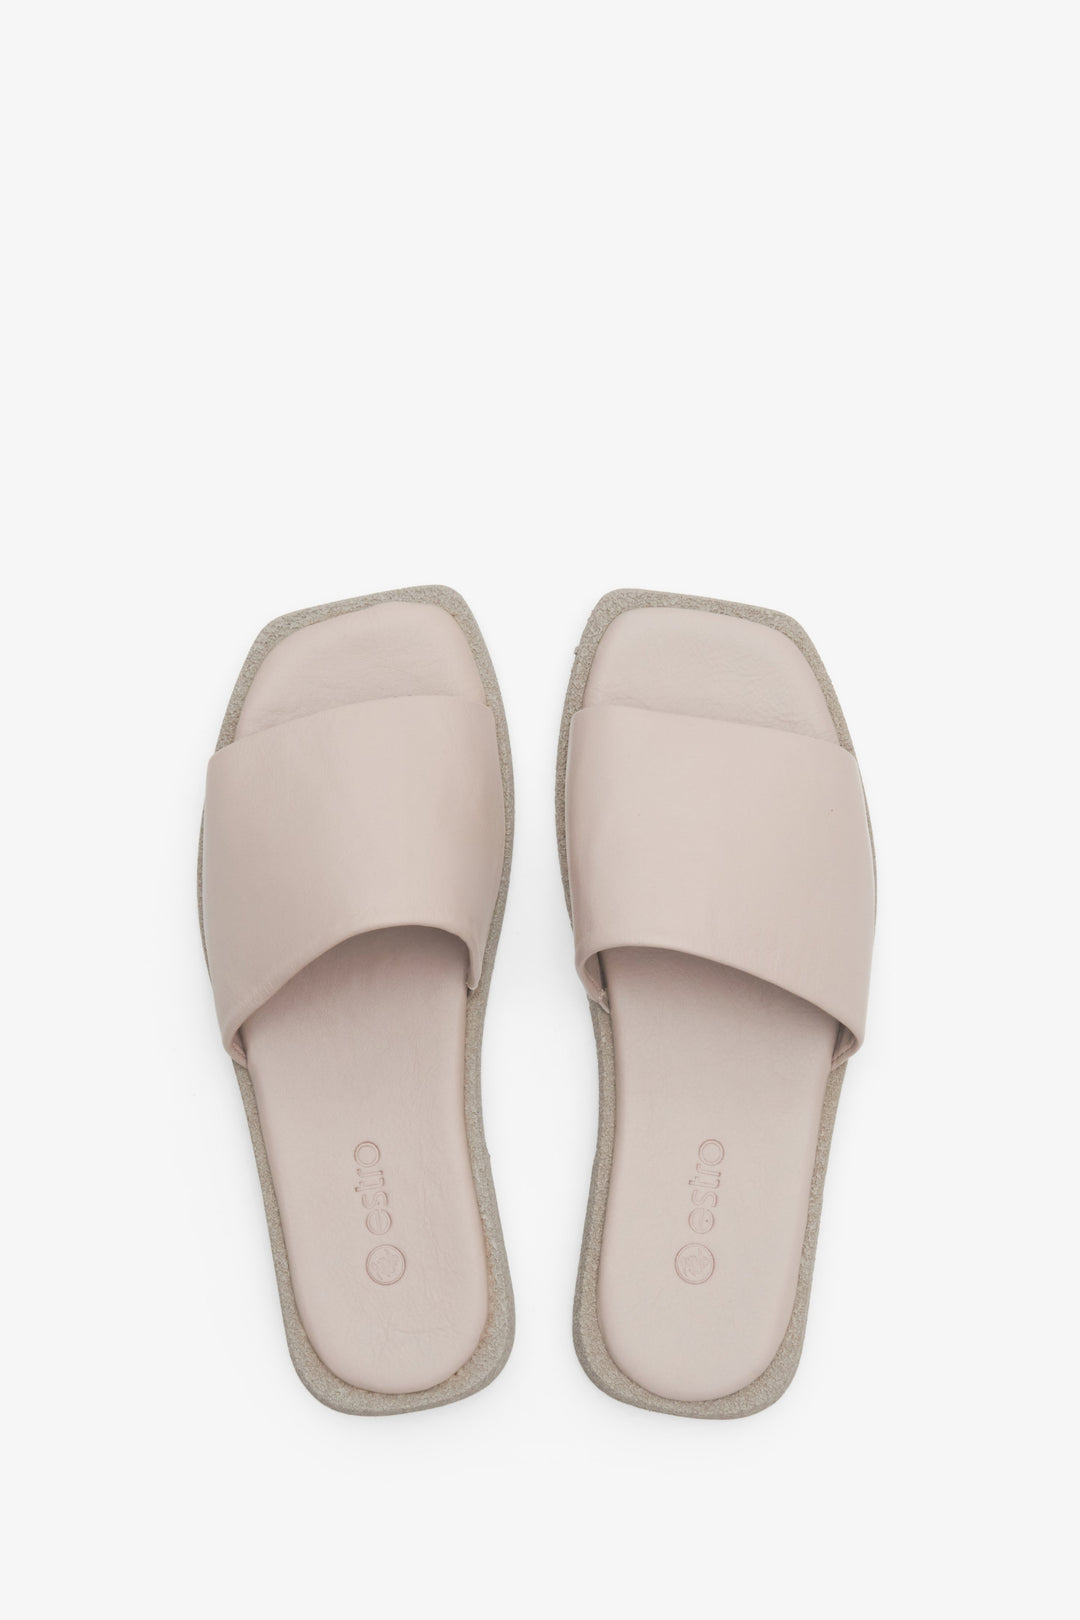 Leather, beige Estro women's flat sandals with a square toe - presentation of the model from above.